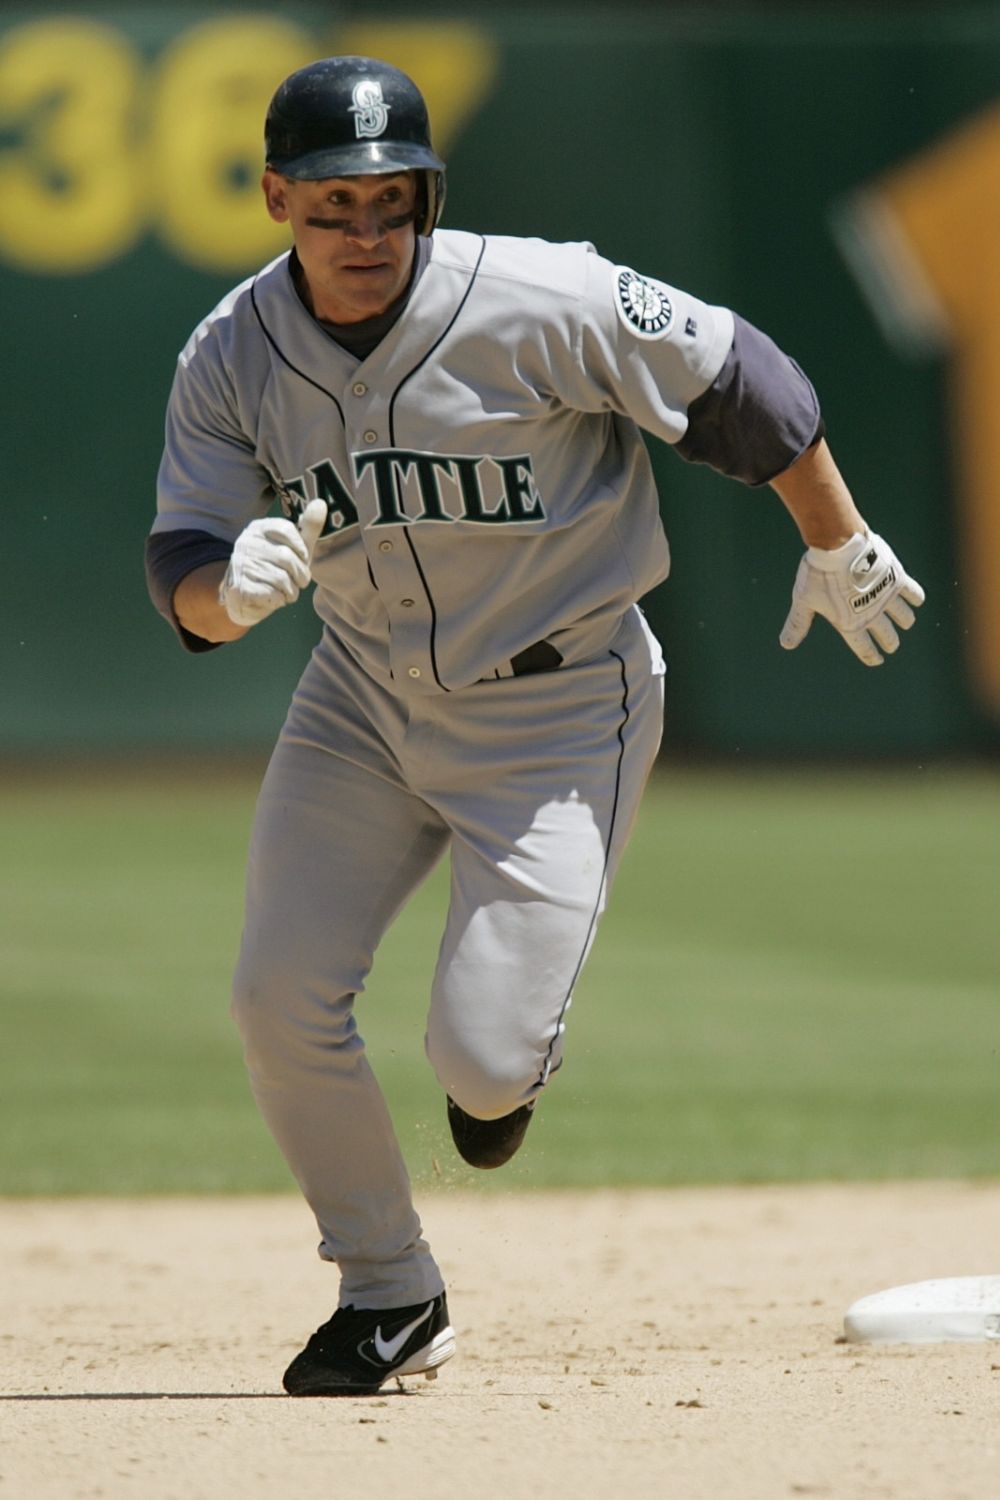 Aaron Boone's Brother Bret Boone 